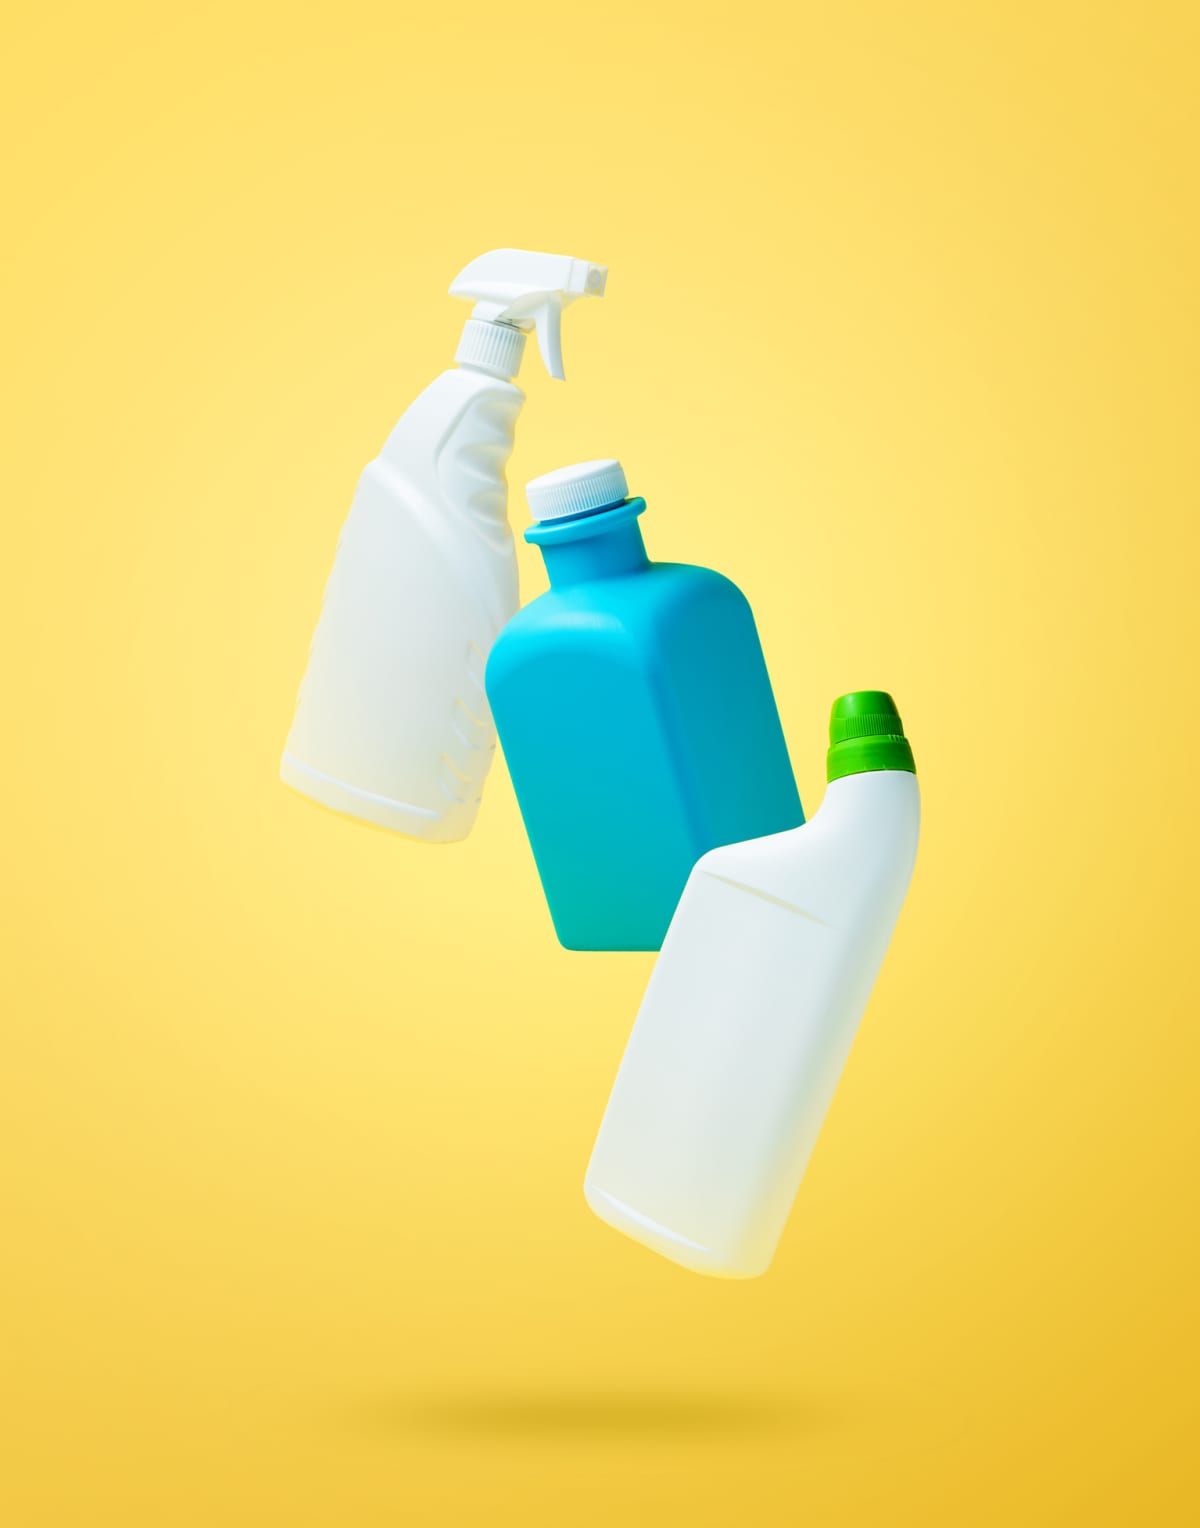 Rubbing alcohol and other cleaning supplies